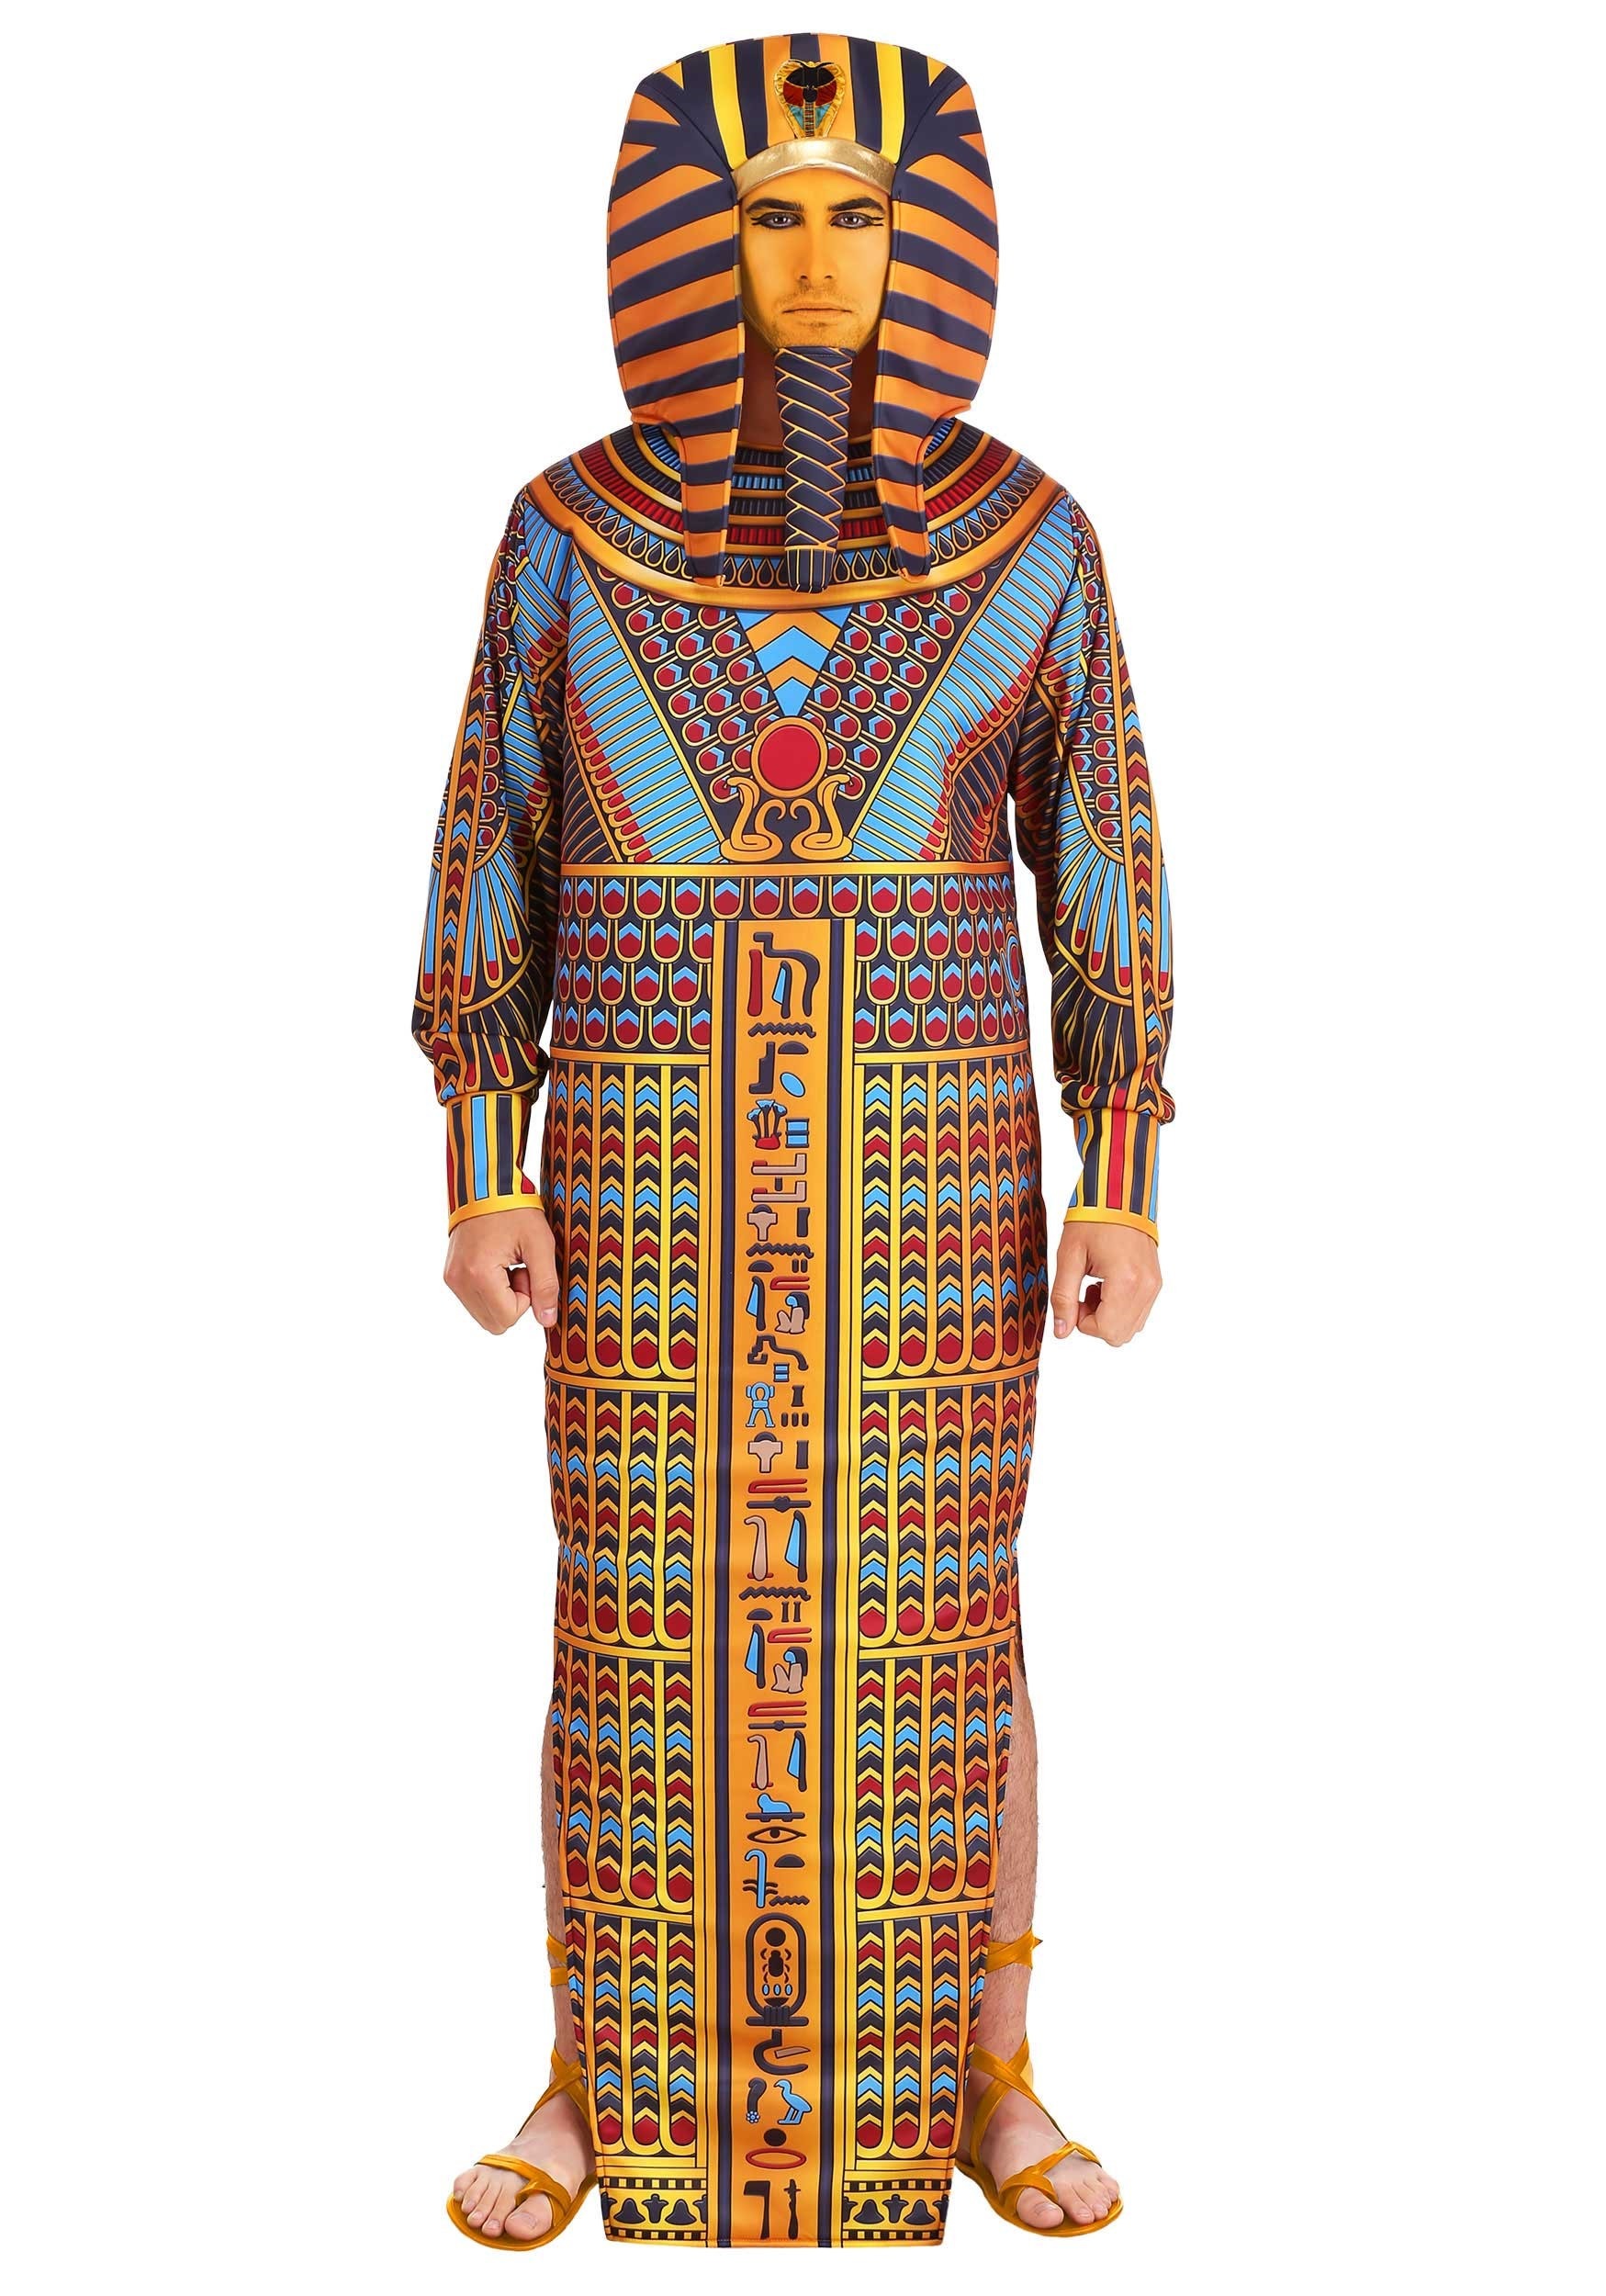 Image of King Tut Sarcophagus Costume for Adults ID FUN7308AD-ST